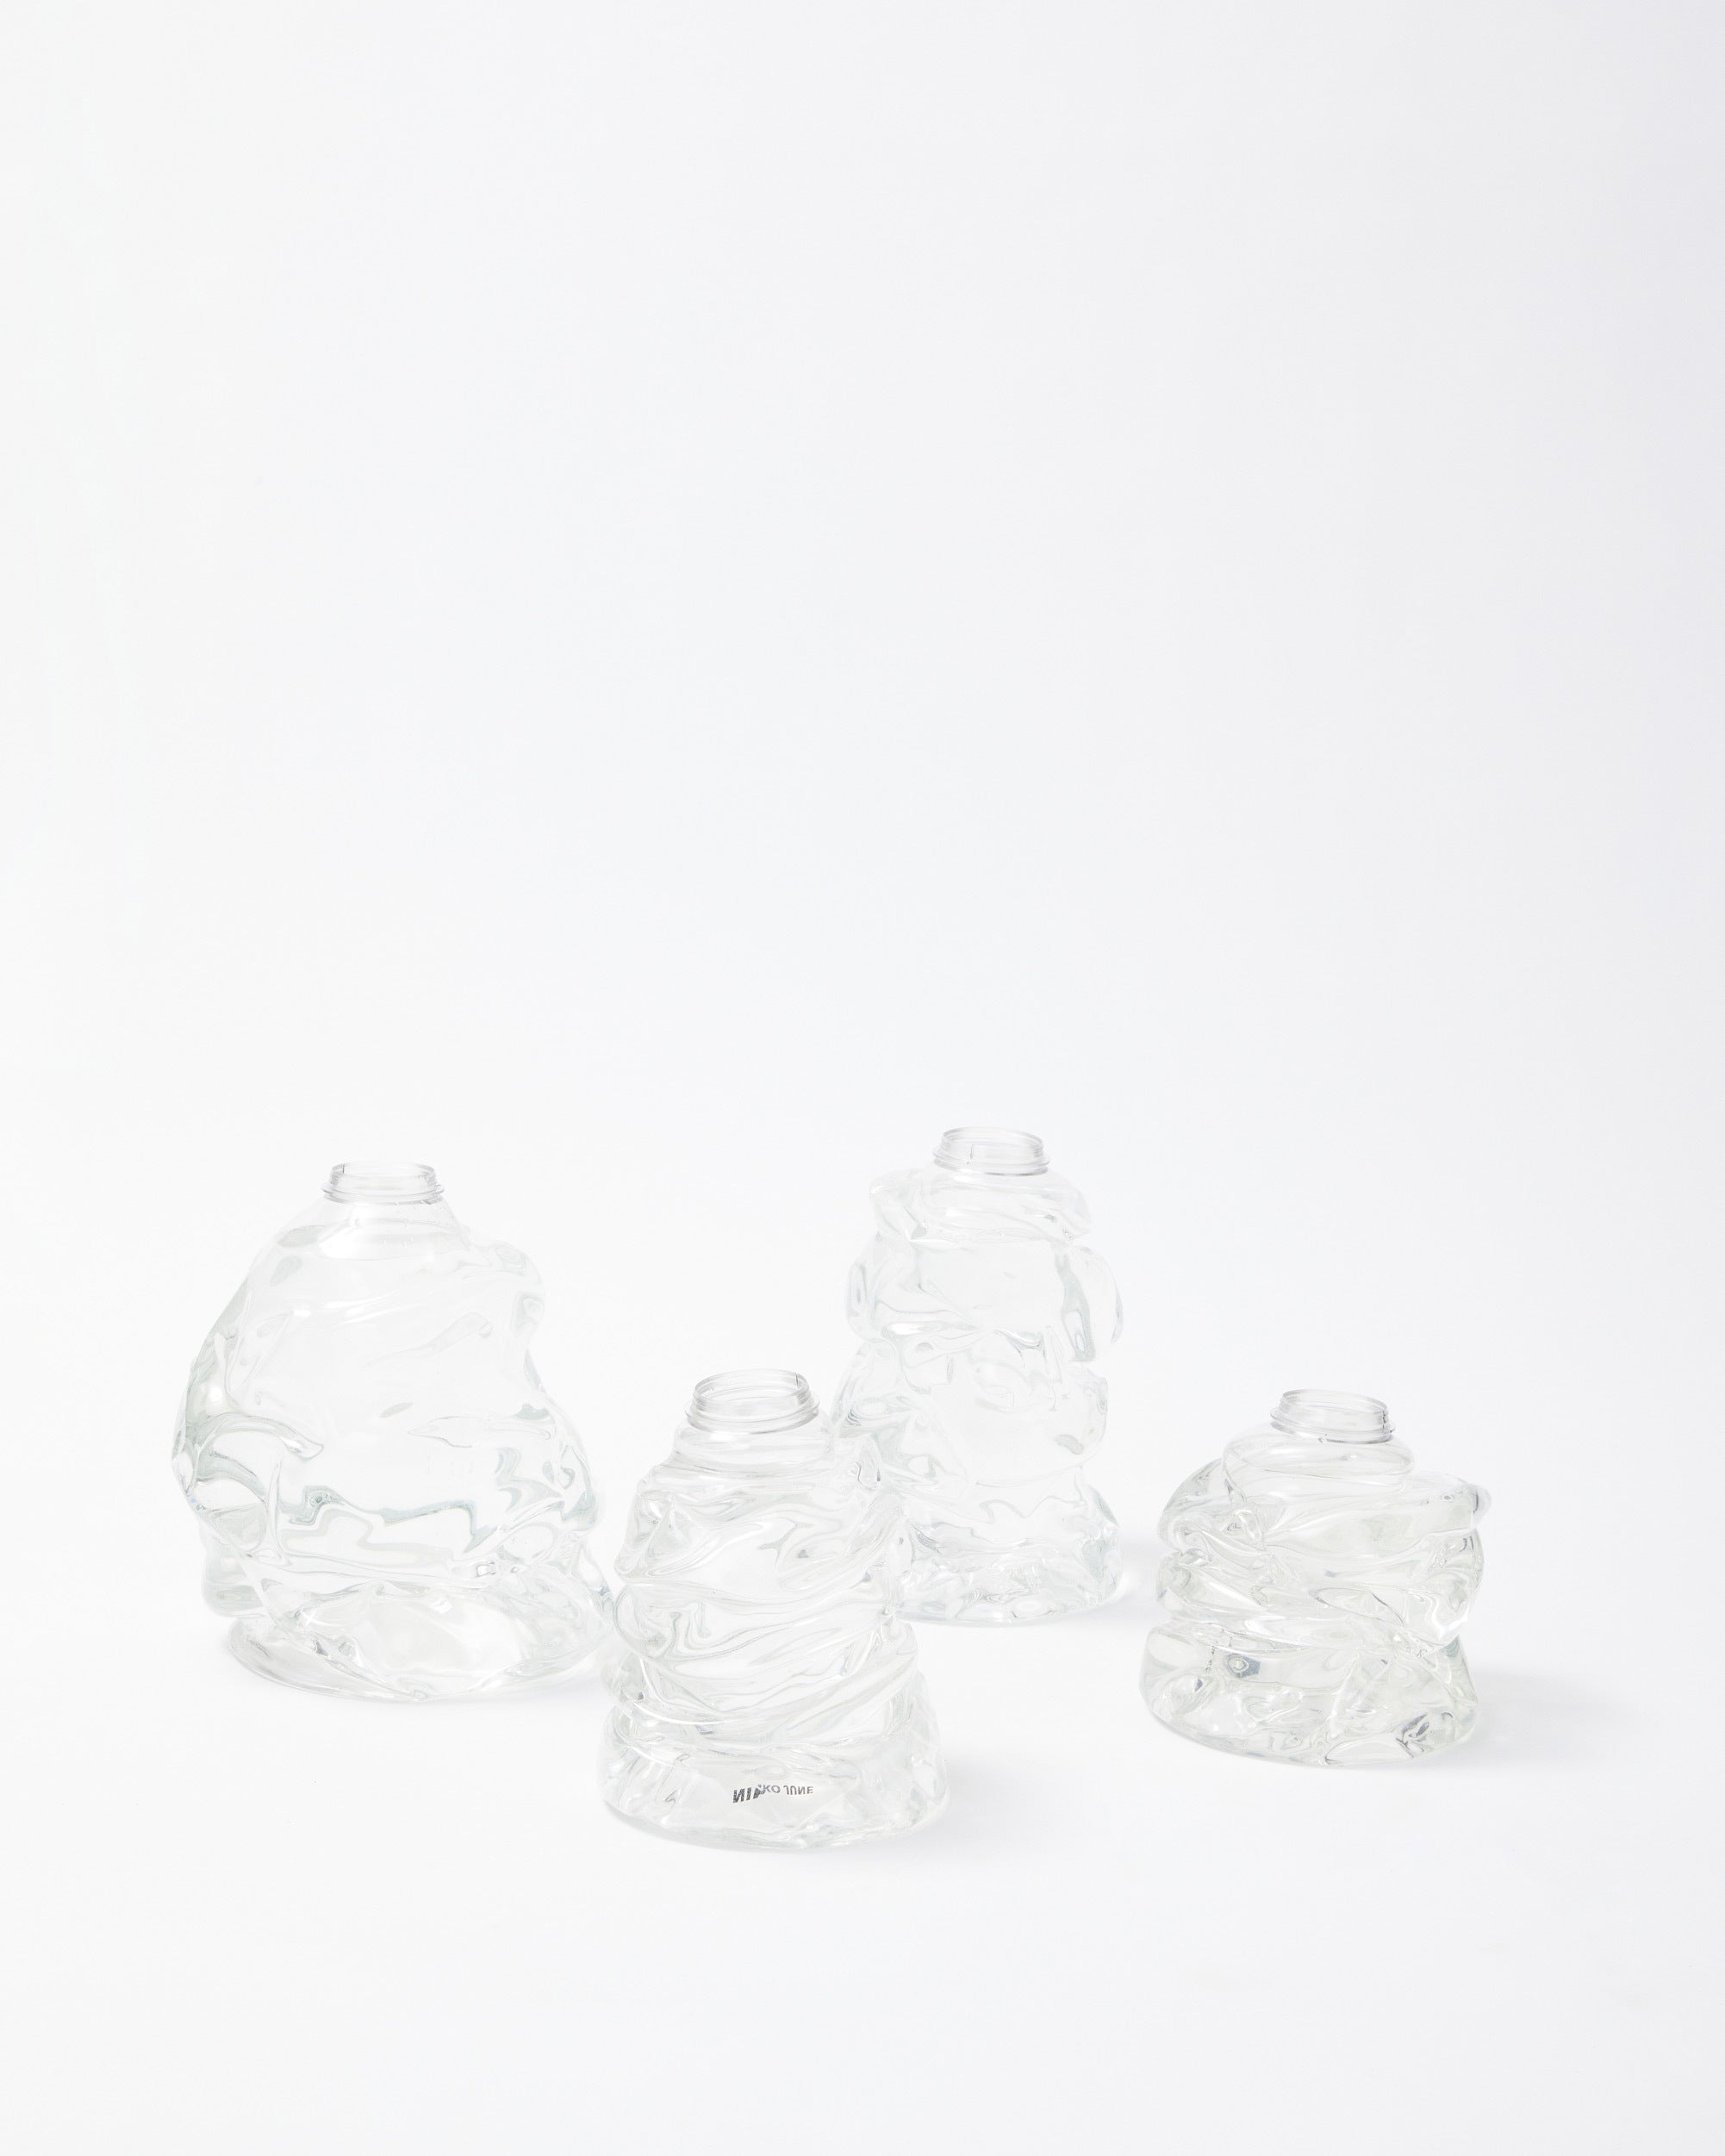 White background, transparent handmade recycled plastic vases of different sizes side by side.